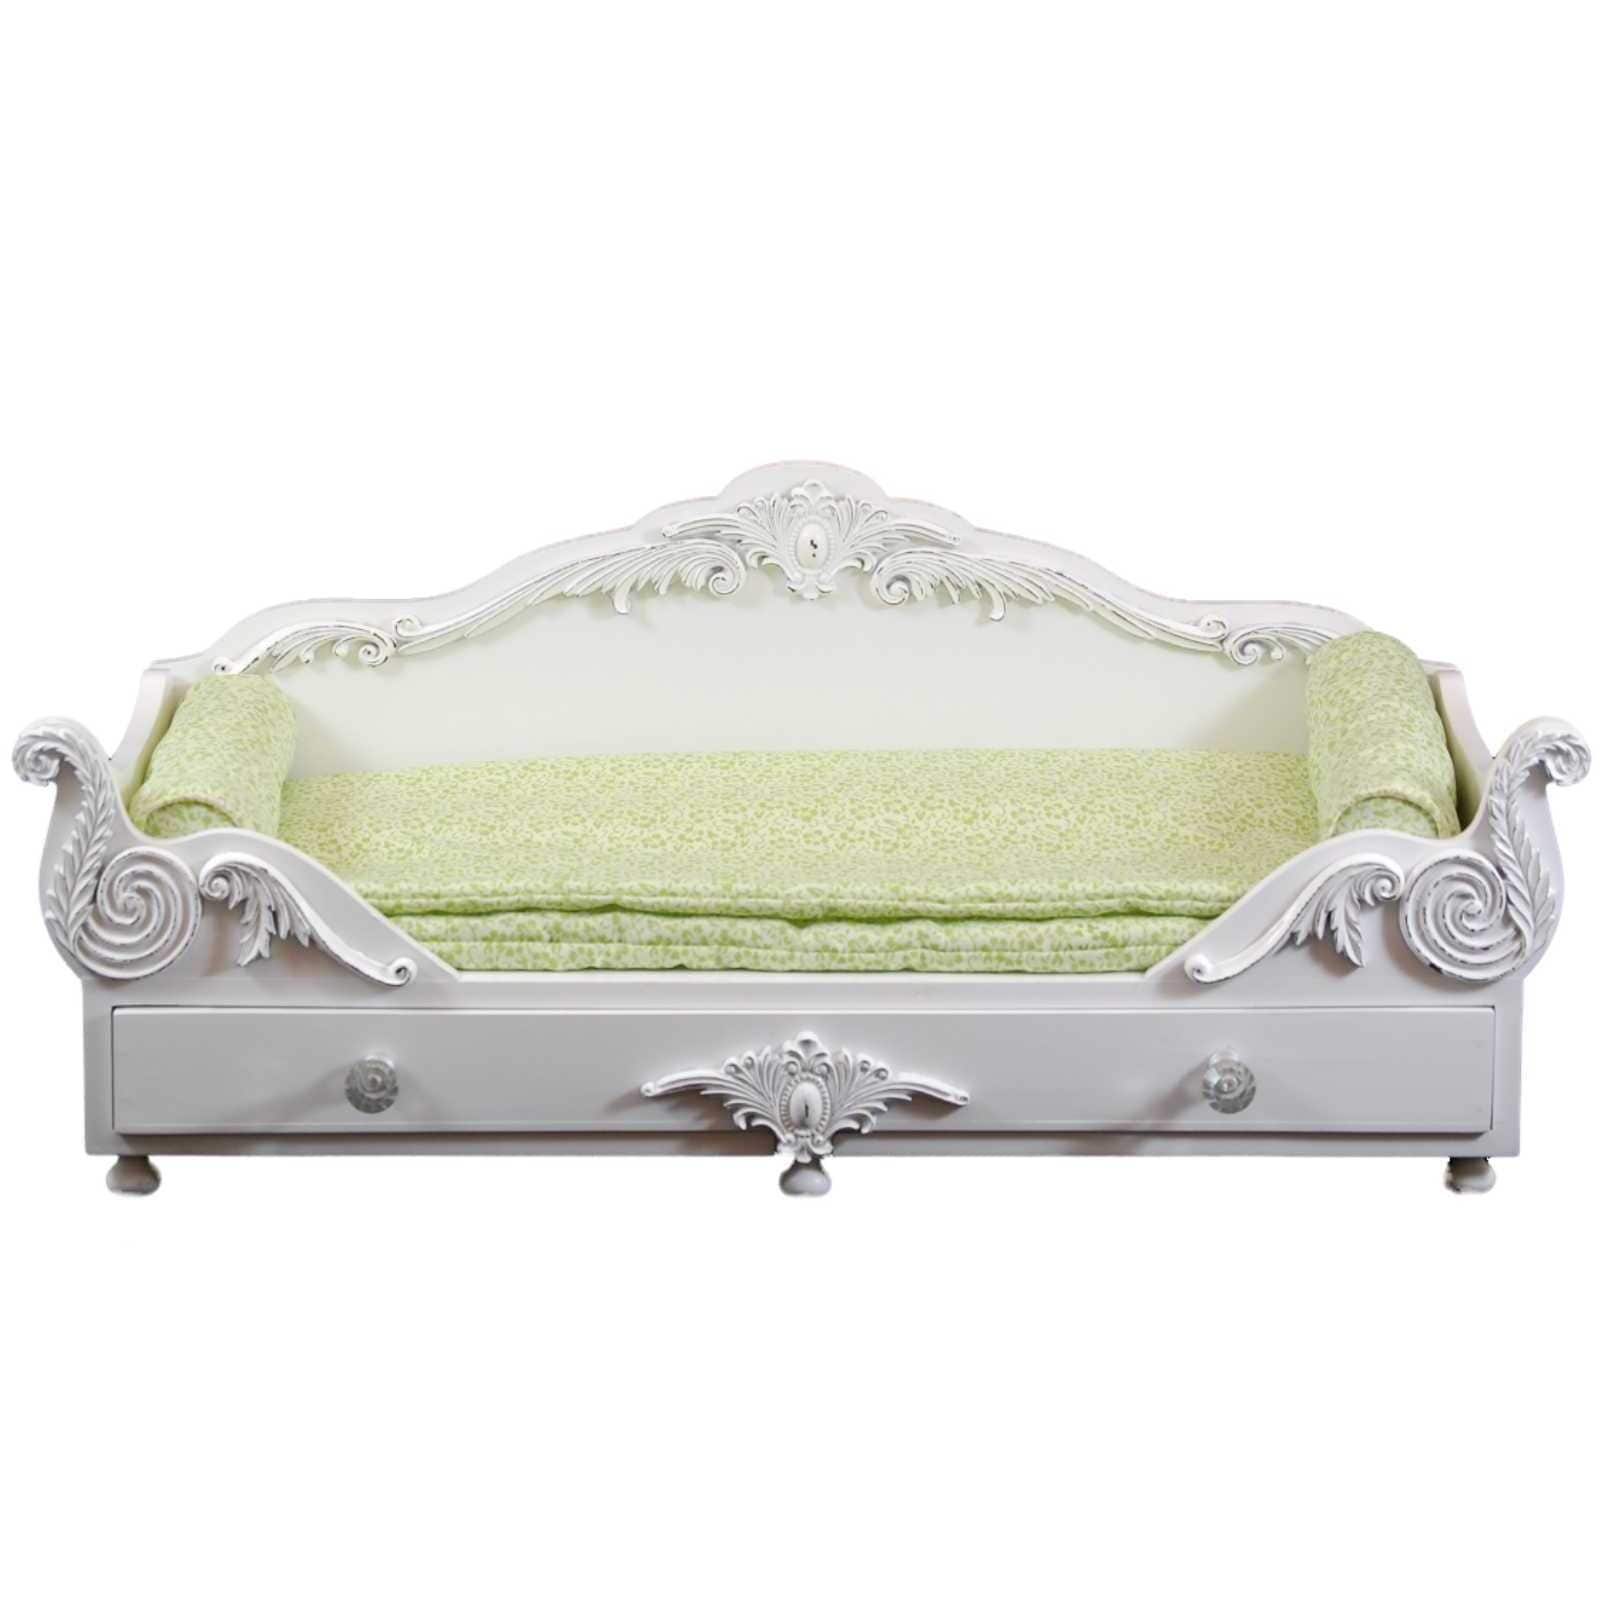 american girl doll daybed